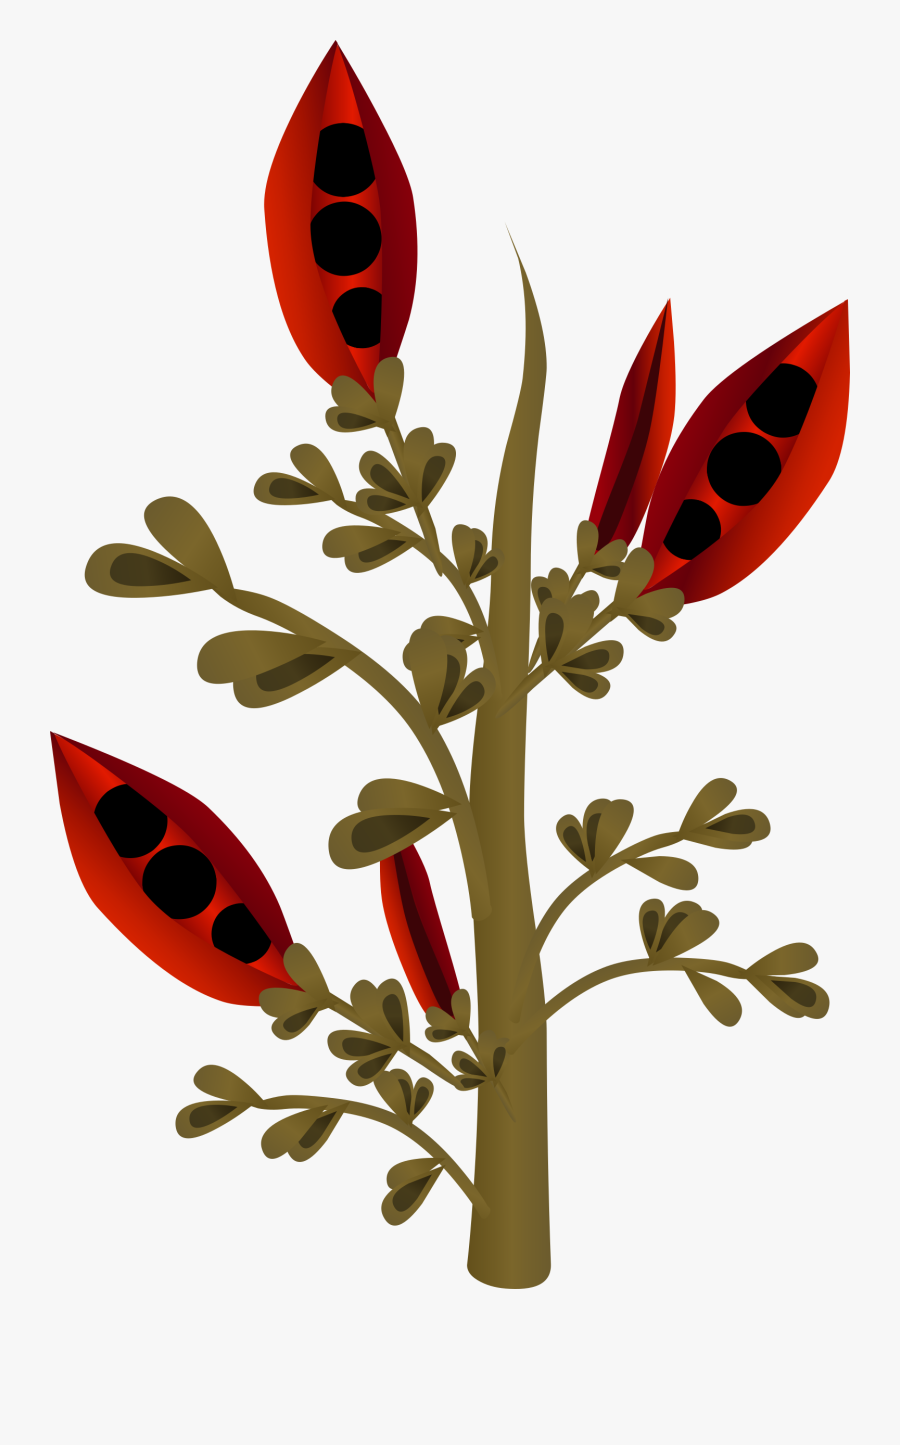 This Free Icons Png Design Of Firebog Firebean - Plants, Transparent Clipart